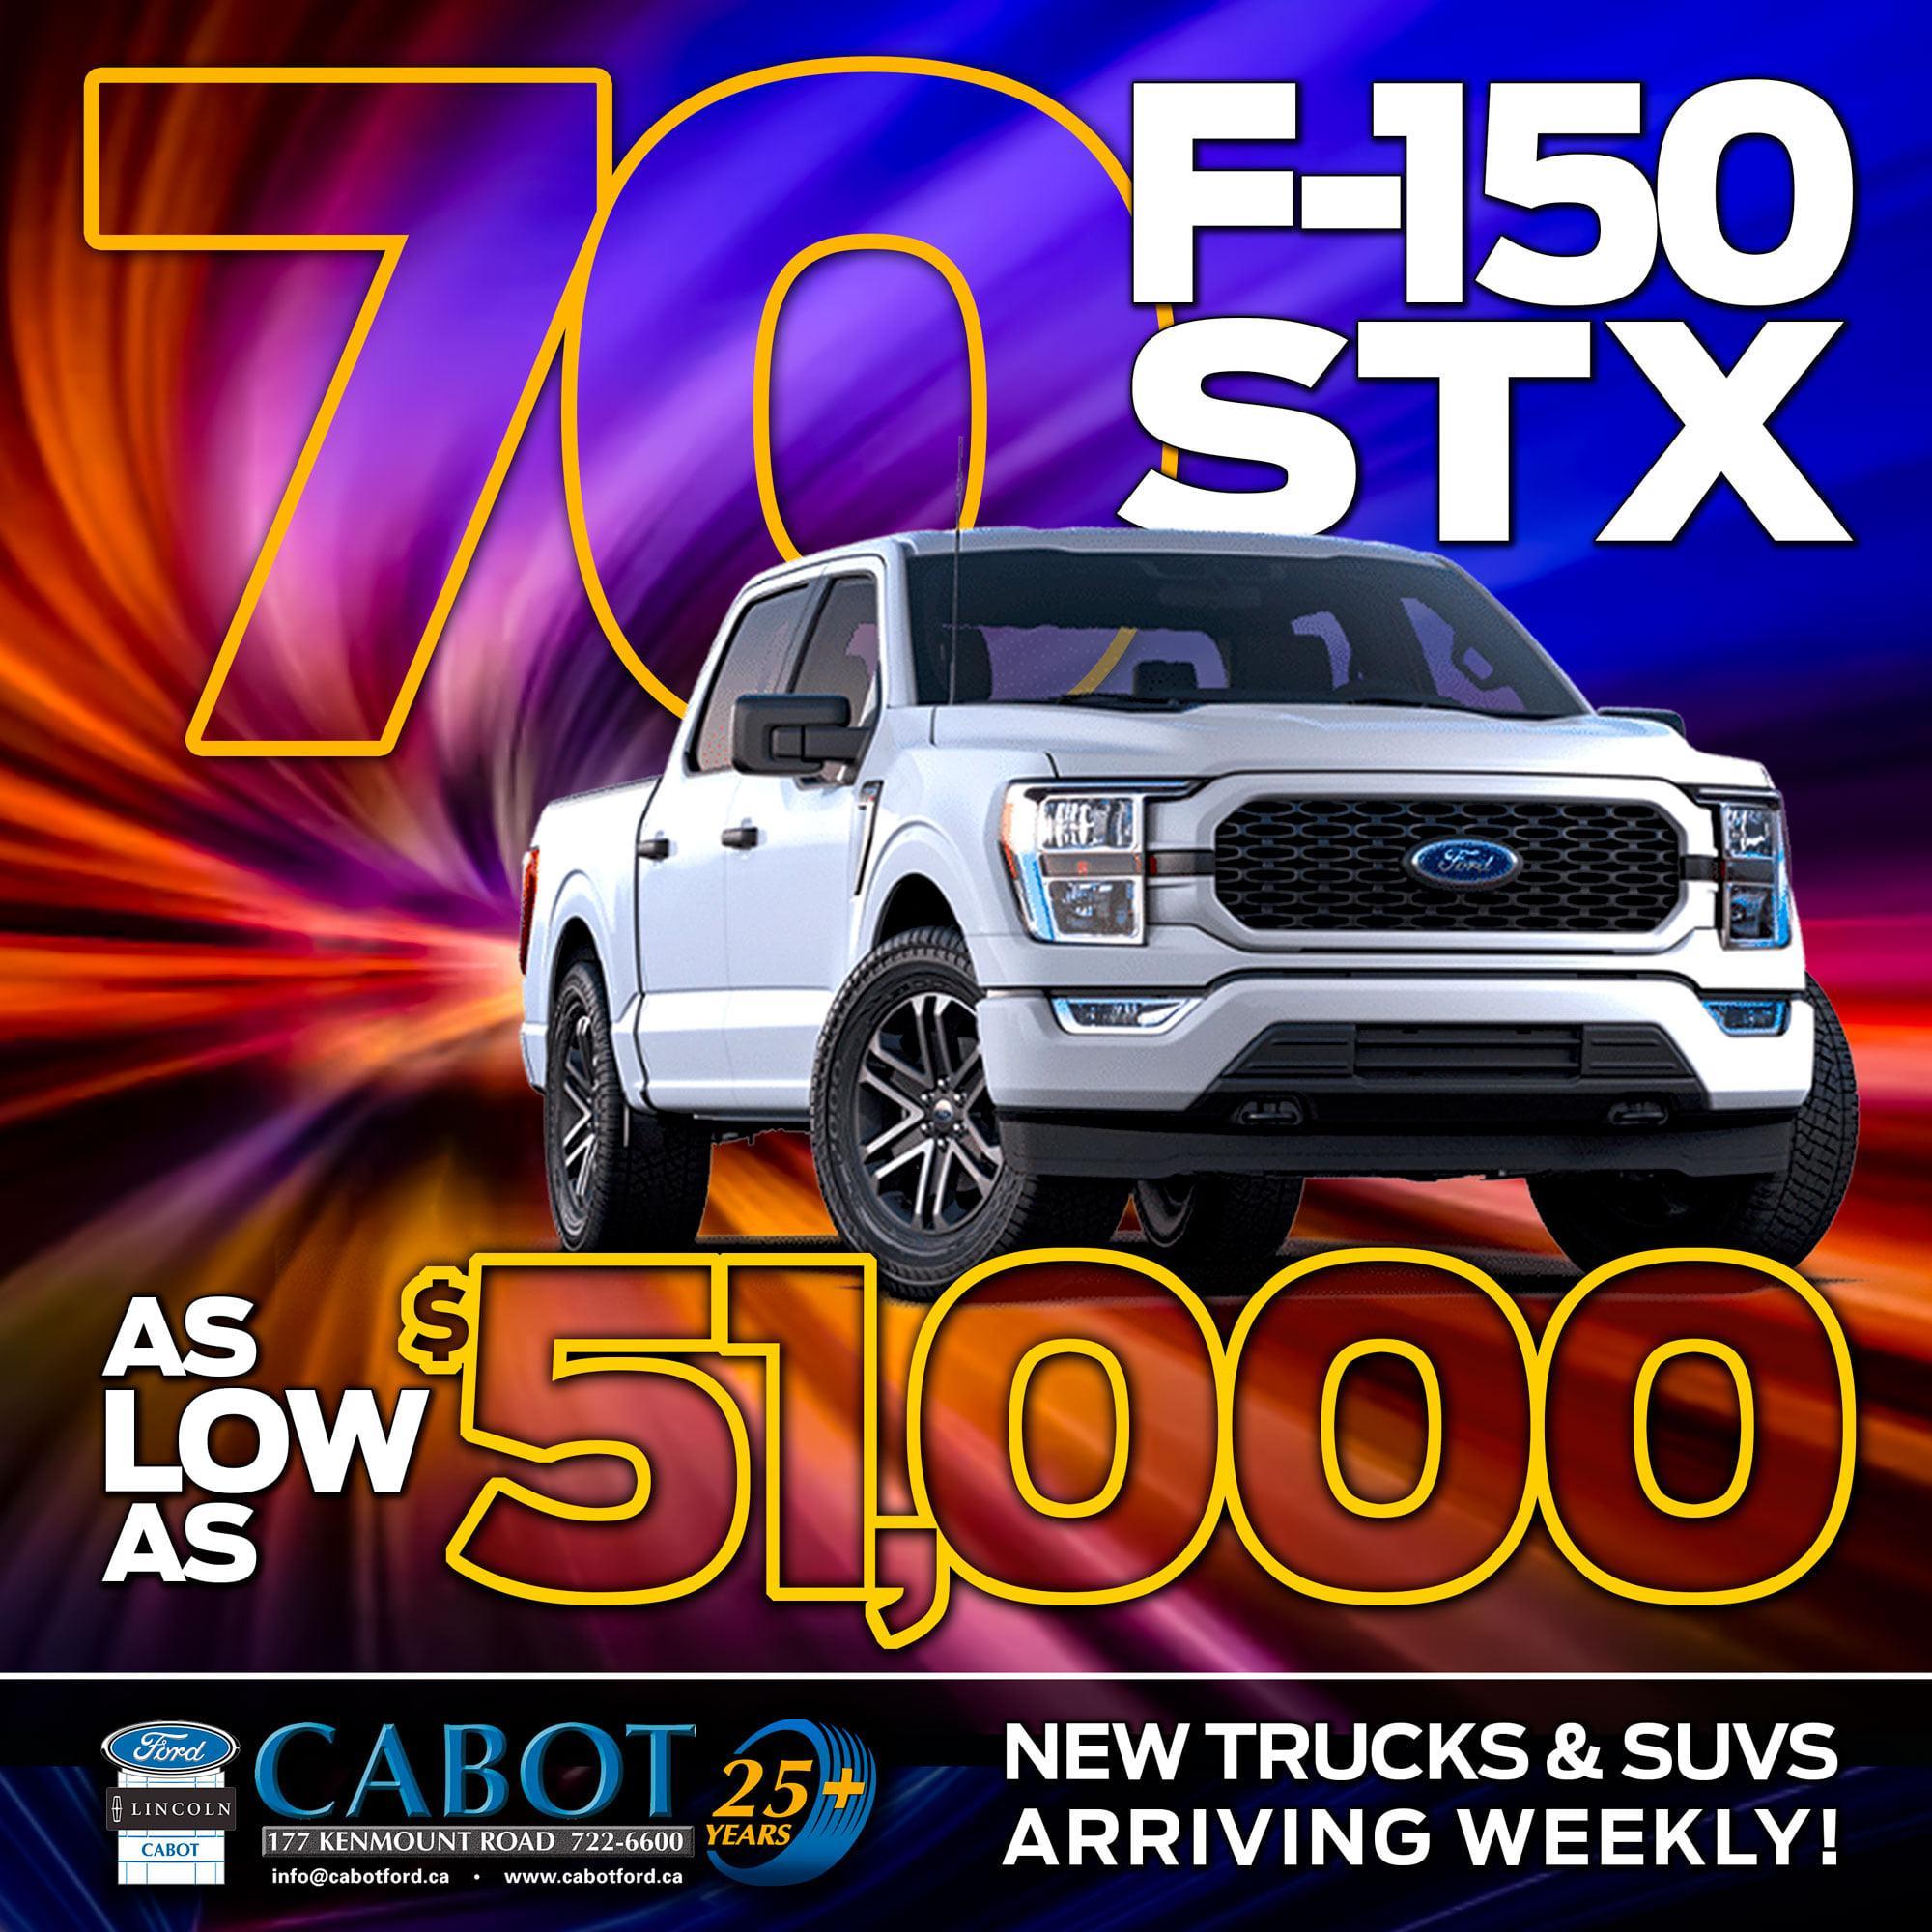 70 available F-150 STXs for as low as $51,000!